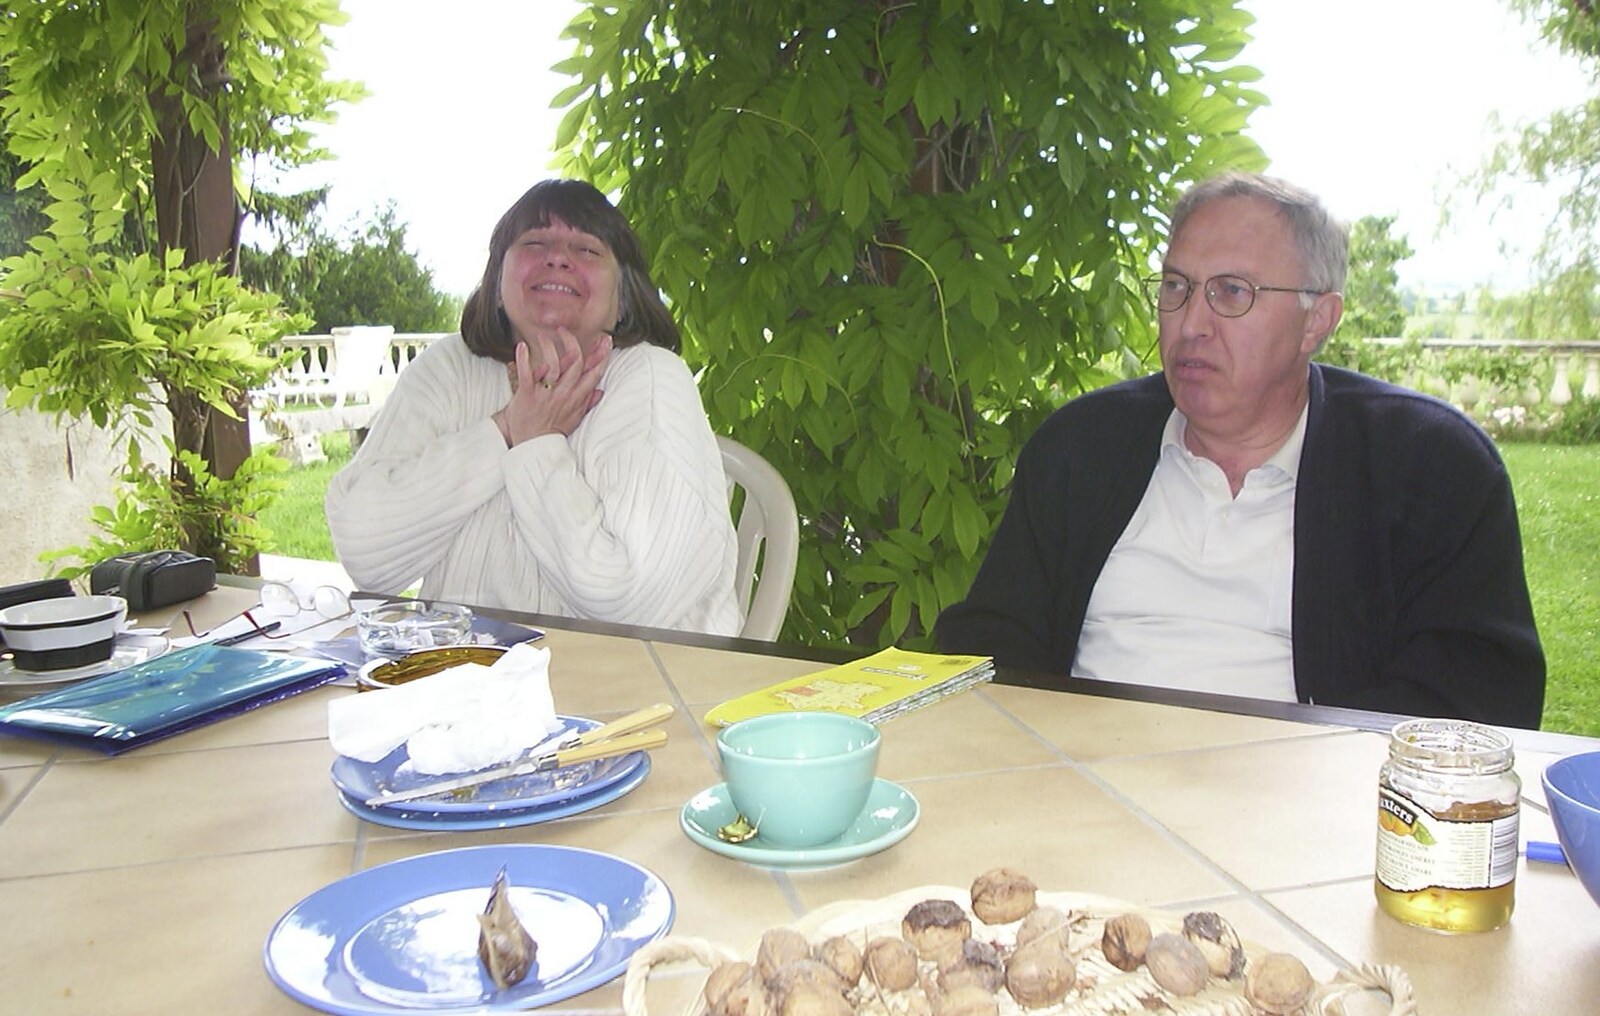 Caroline and Bruno, and a plate of profiteroles from A Short Holiday in Chivres, Burgundy, France - 21st July 2001